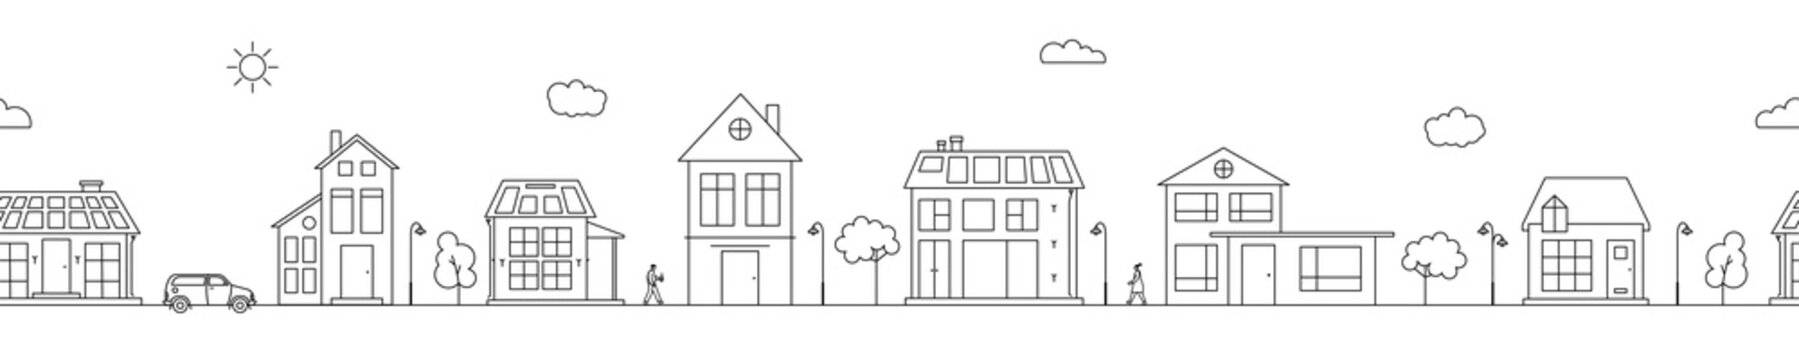 Seamless web banner with Neighborhood line art vector illustration. Cityscape with monochrome residential buildings and solar panels on roofs